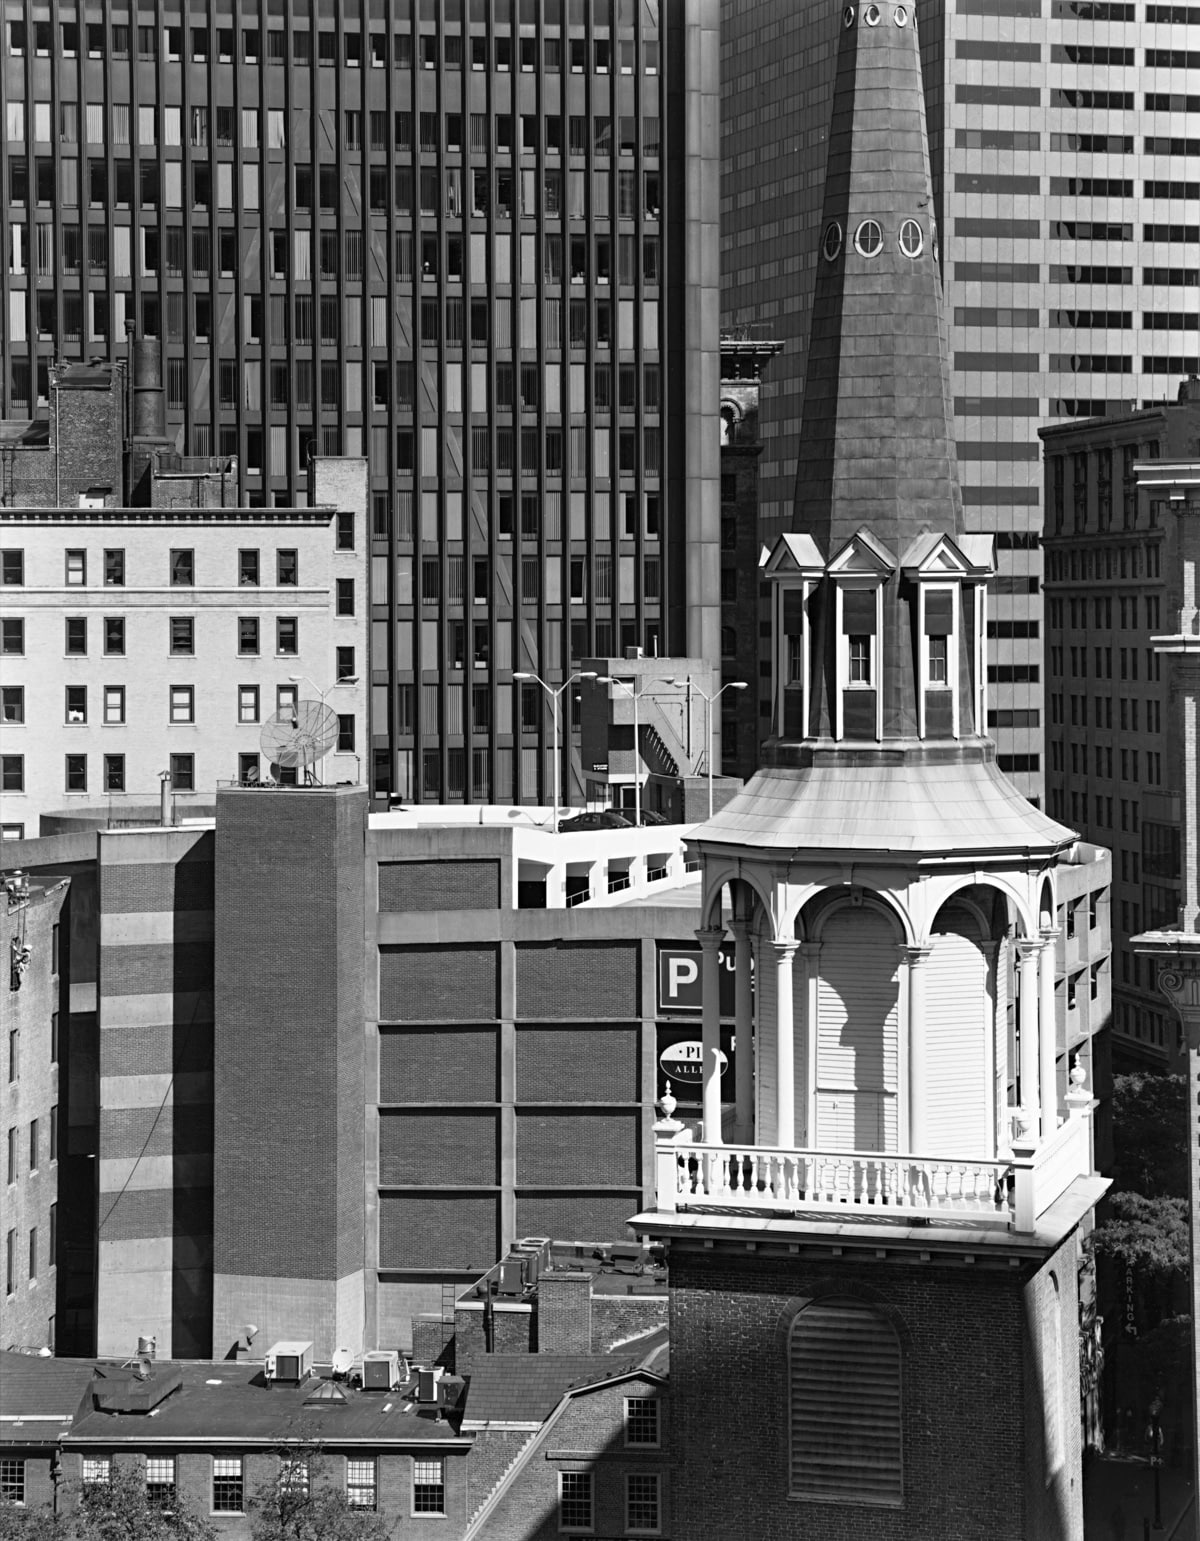 View of the Old South Meeting House, Boston